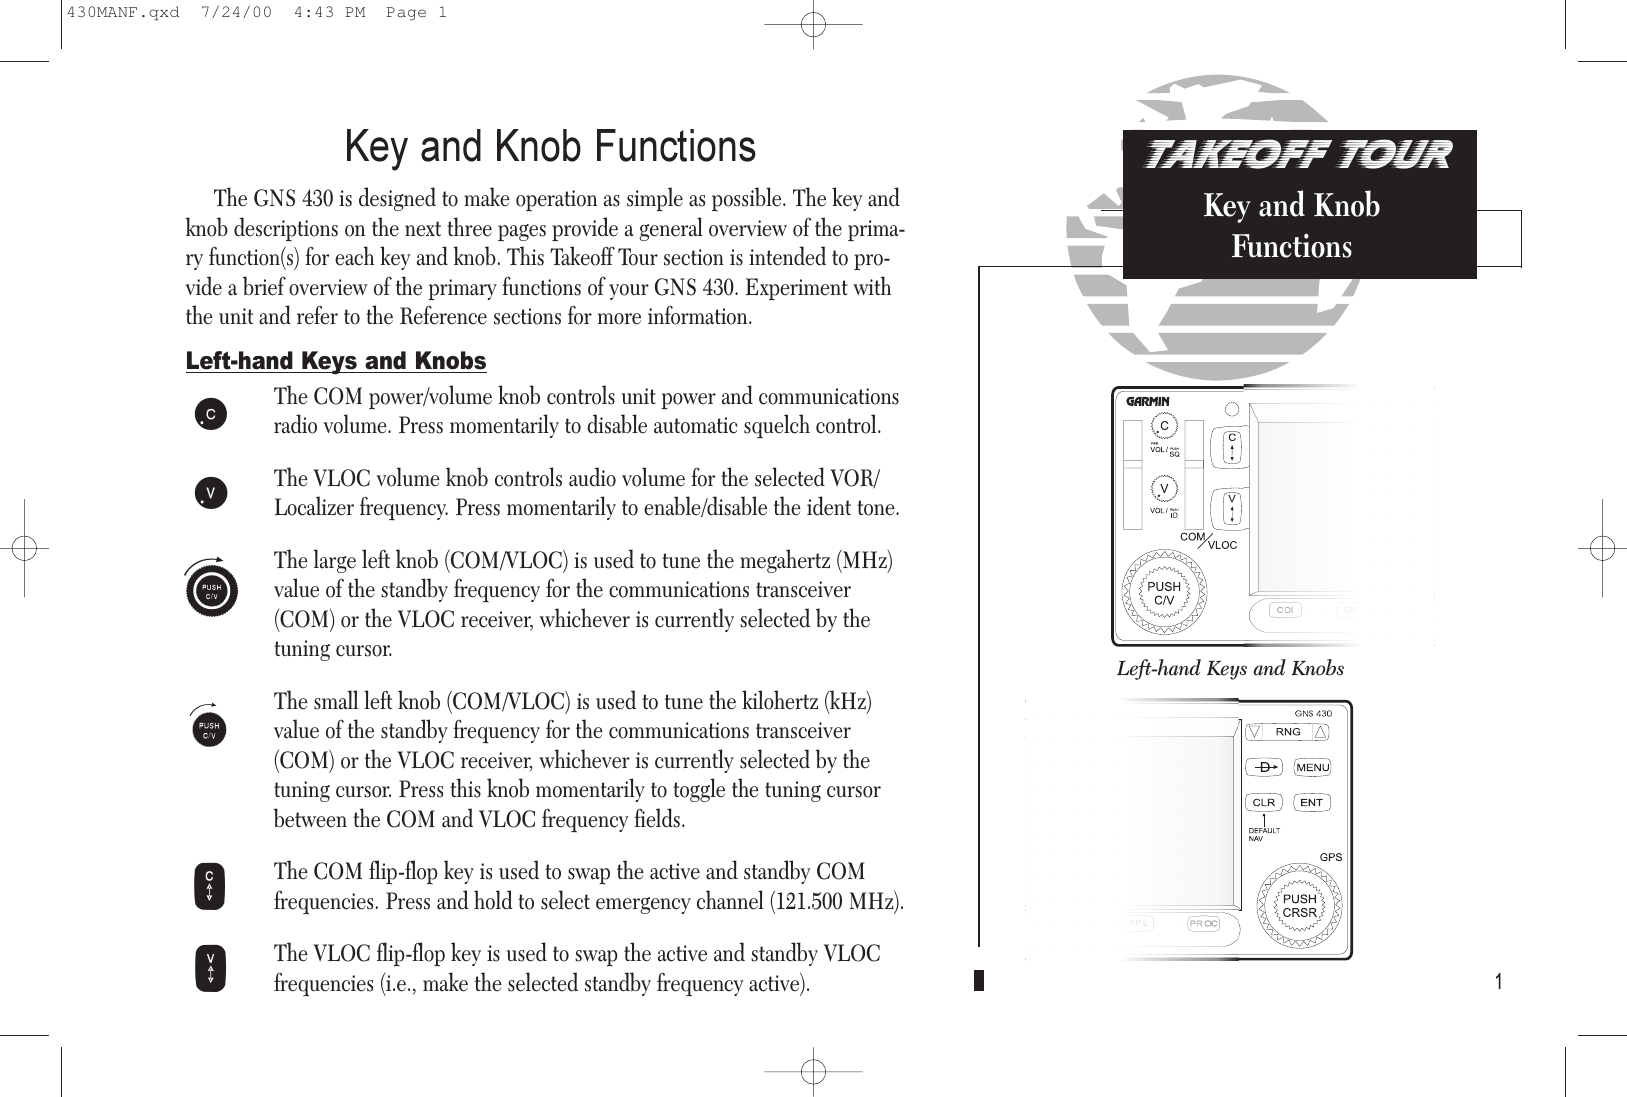 TAKEOFF TOURKey and KnobFunctionsKey and Knob FunctionsThe GNS 430 is designed to make operation as simple as possible. The key andknob descriptions on the next three pages provide a general overview of the prima-ry function(s) for each key and knob. This Takeoff Tour section is intended to pro-vide a brief overview of the primary functions of your GNS 430. Experiment withthe unit and refer to the Reference sections for more information. Left-hand Keys and KnobsThe COM power/volume knob controls unit power and communicationsradio volume. Press momentarily to disable automatic squelch control.The VLOC volume knob controls audio volume for the selected VOR/Localizer frequency. Press momentarily to enable/disable the ident tone.The large left knob (COM/VLOC) is used to tune the megahertz (MHz) value of the standby frequency for the communications transceiver (COM) or the VLOC receiver, whichever is currently selected by thetuning cursor.The small left knob (COM/VLOC) is used to tune the kilohertz (kHz)value of the standby frequency for the communications transceiver(COM) or the VLOC receiver, whichever is currently selected by thetuning cursor. Press this knob momentarily to toggle the tuning cursorbetween the COM and VLOC frequency fields.The COM flip-flop key is used to swap the active and standby COMfrequencies. Press and hold to select emergency channel (121.500 MHz).The VLOC flip-flop key is used to swap the active and standby VLOCfrequencies (i.e., make the selected standby frequency active). 1hfWVkjLeft-hand Keys and KnobsRight-hand Keys and Knobs430MANF.qxd  7/24/00  4:43 PM  Page 1